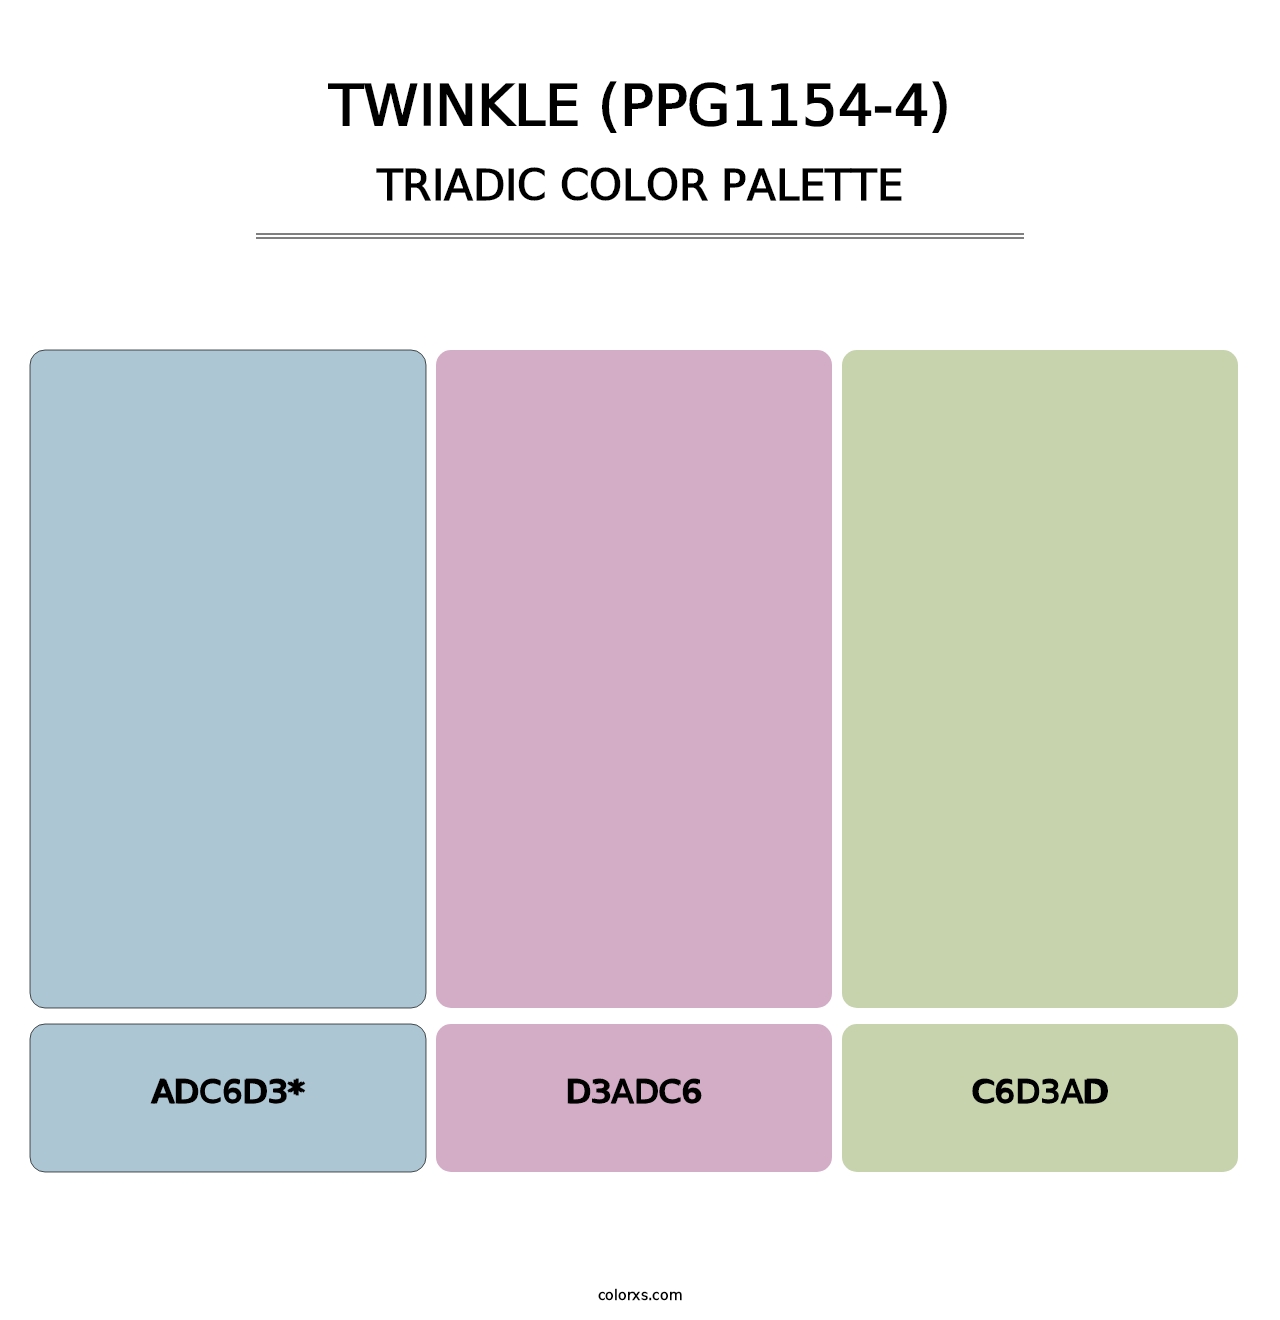 Twinkle (PPG1154-4) - Triadic Color Palette